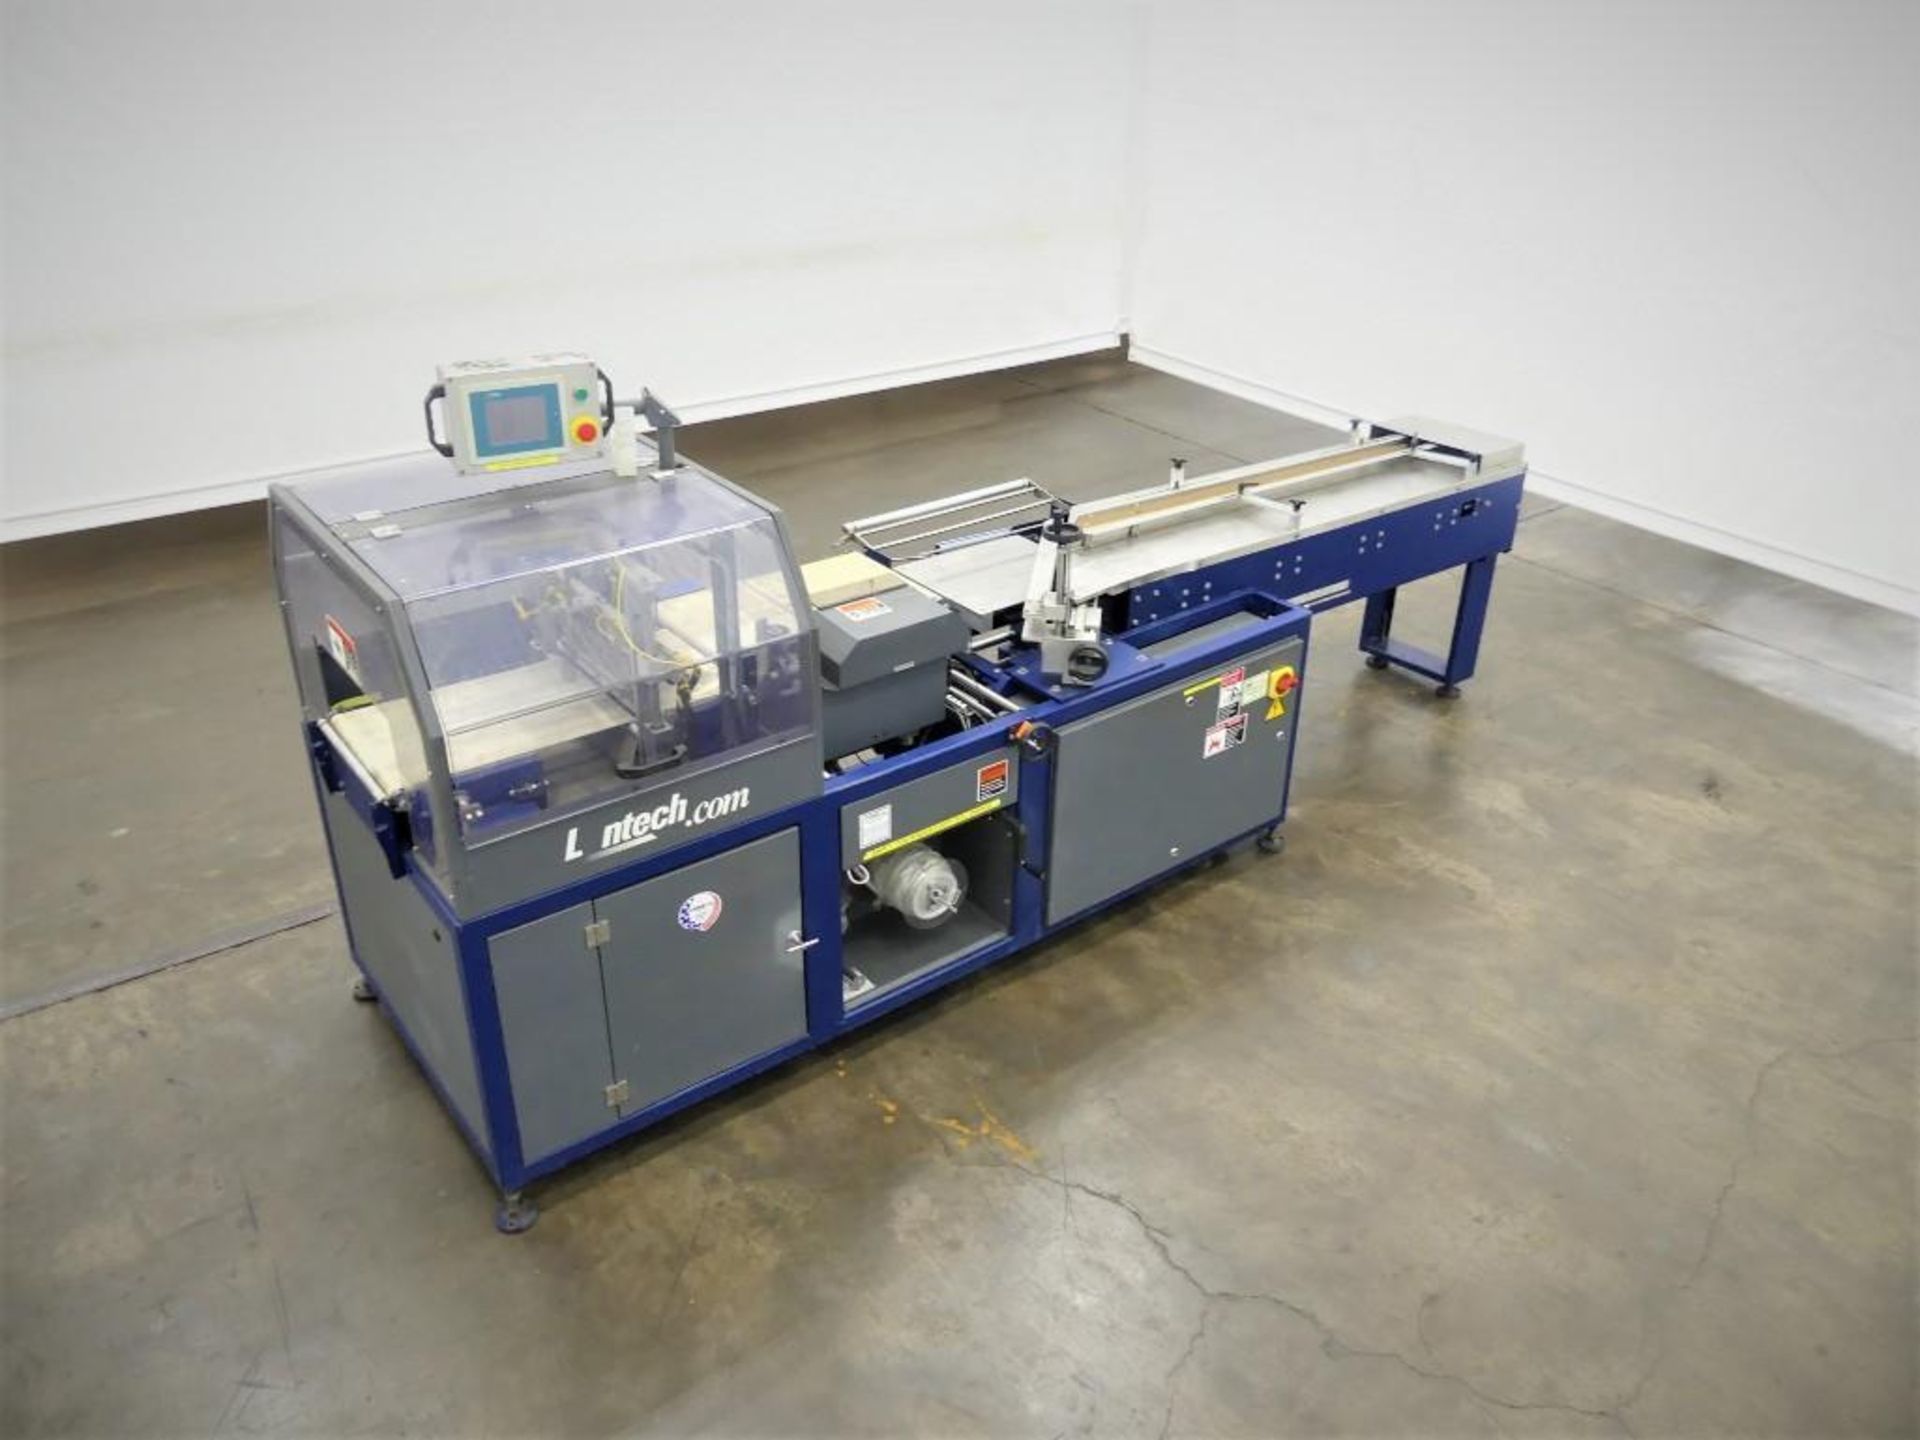 Lantech 200 Side Sealer Includes all parts, electronic components, manuals, etc - Image 2 of 17